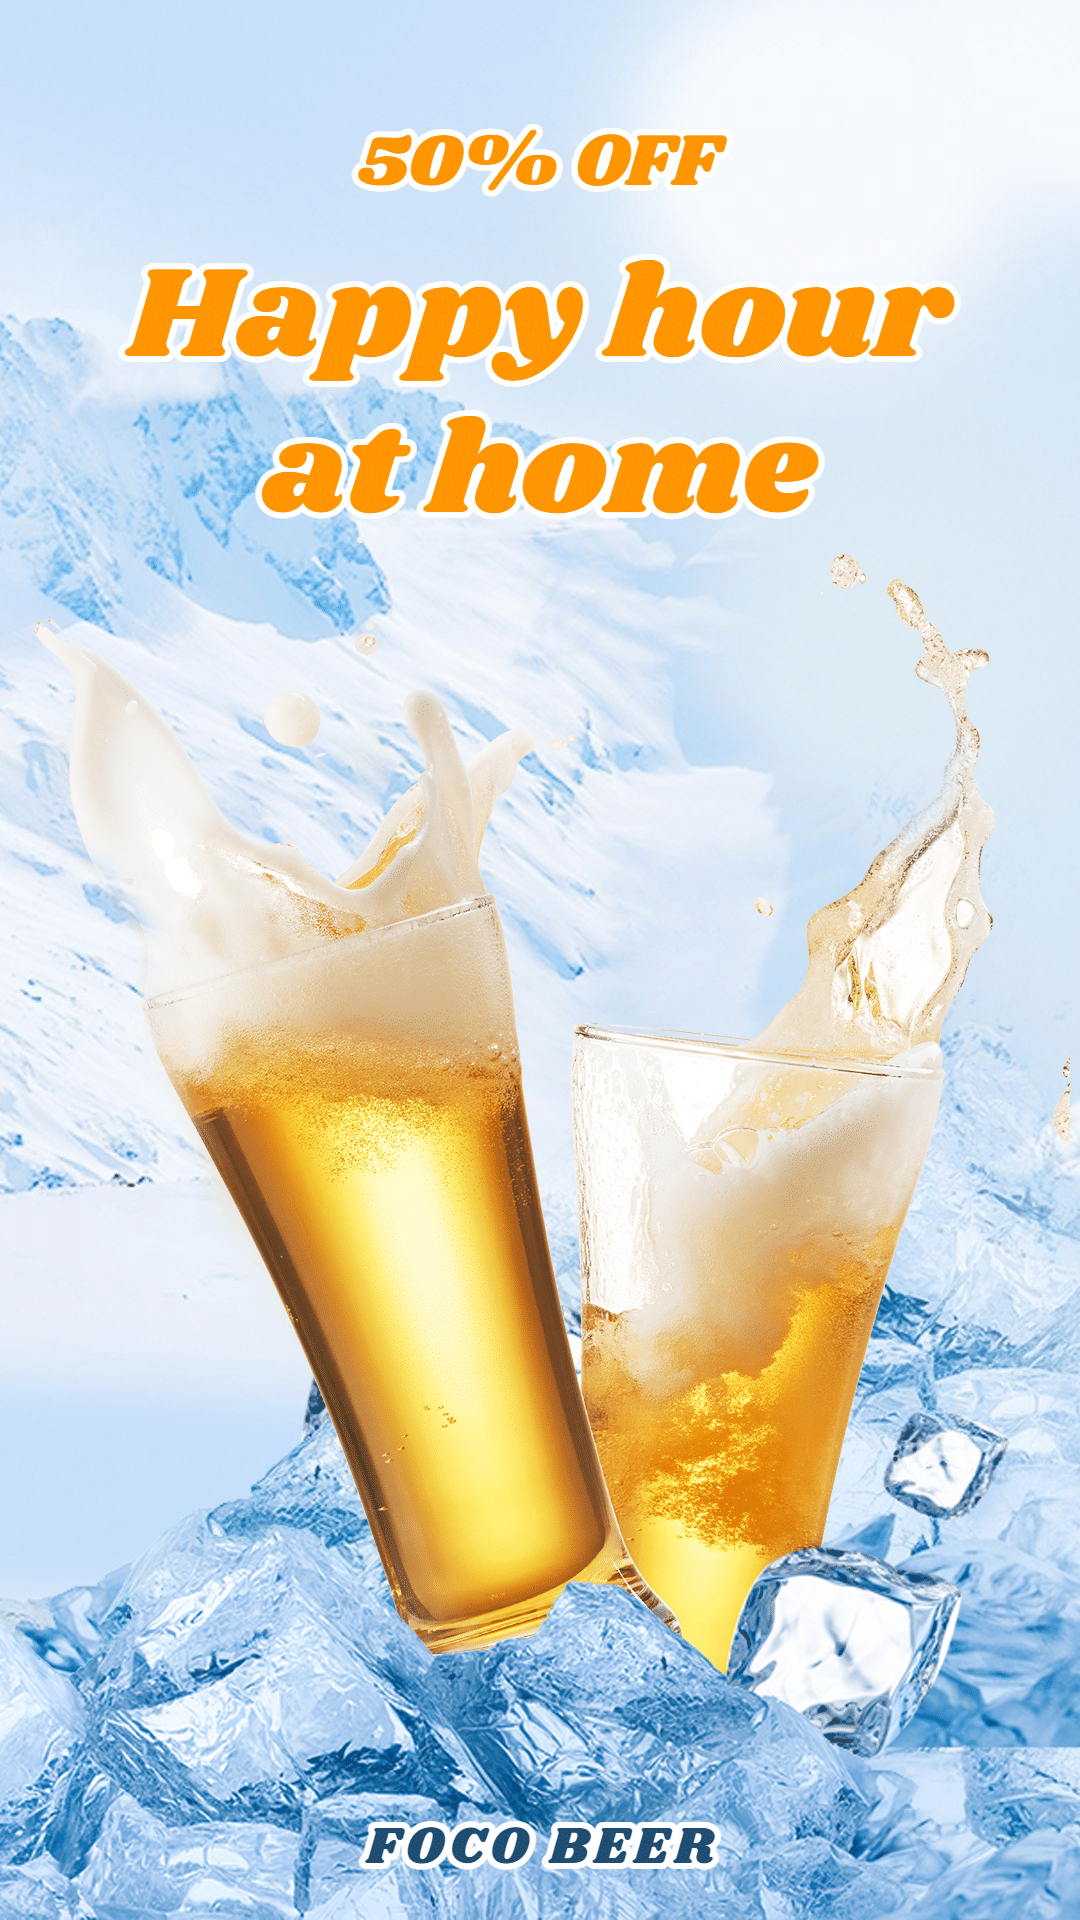 Creative Beers Promotion Discount Ecommerce Story预览效果